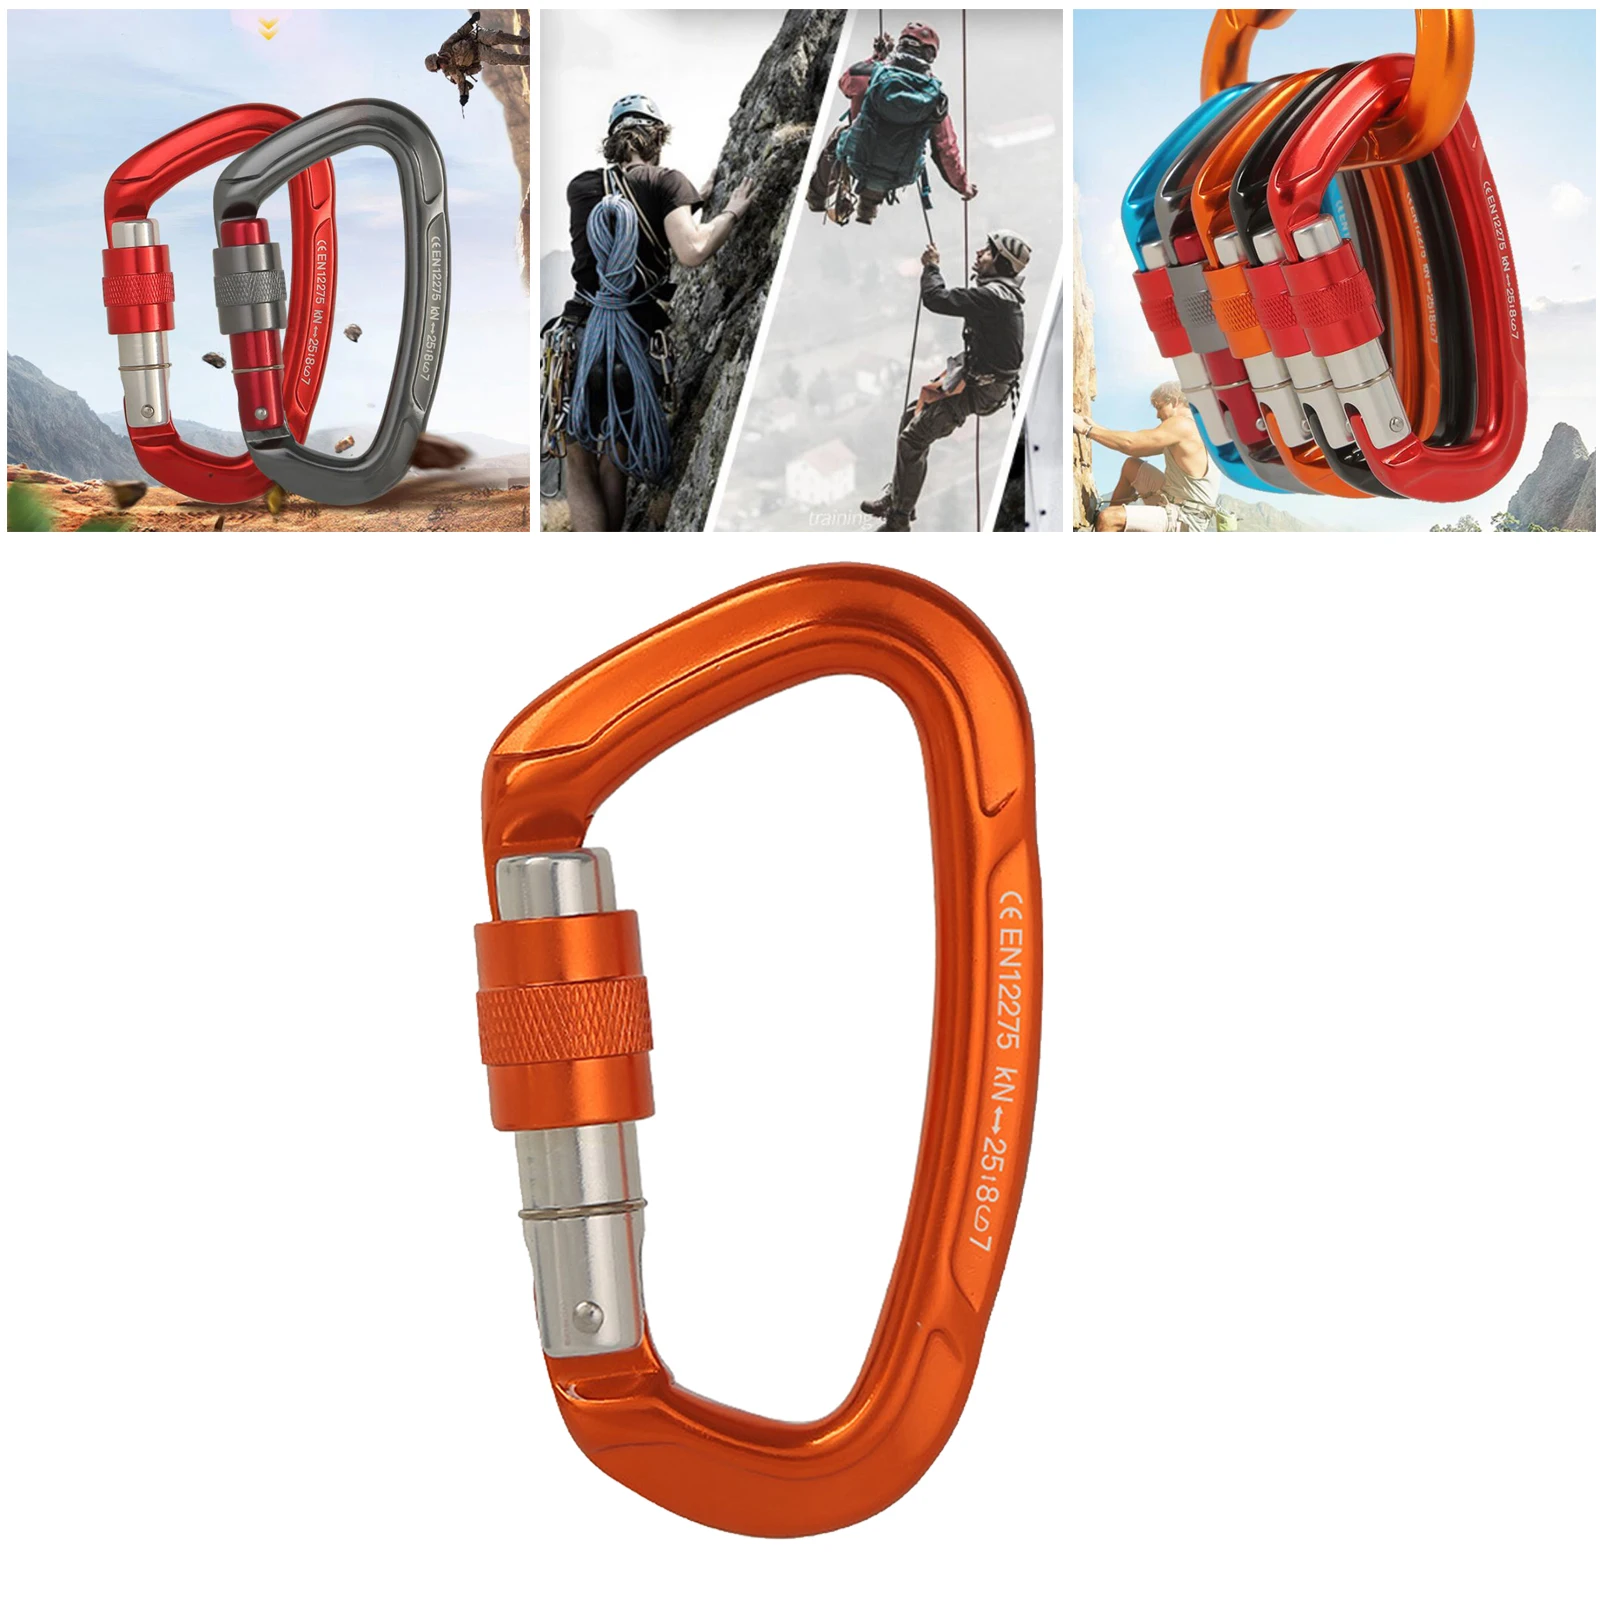 25kn Climbing Carabiner Clip Rappelling High Strength Carabiners Safety Gear